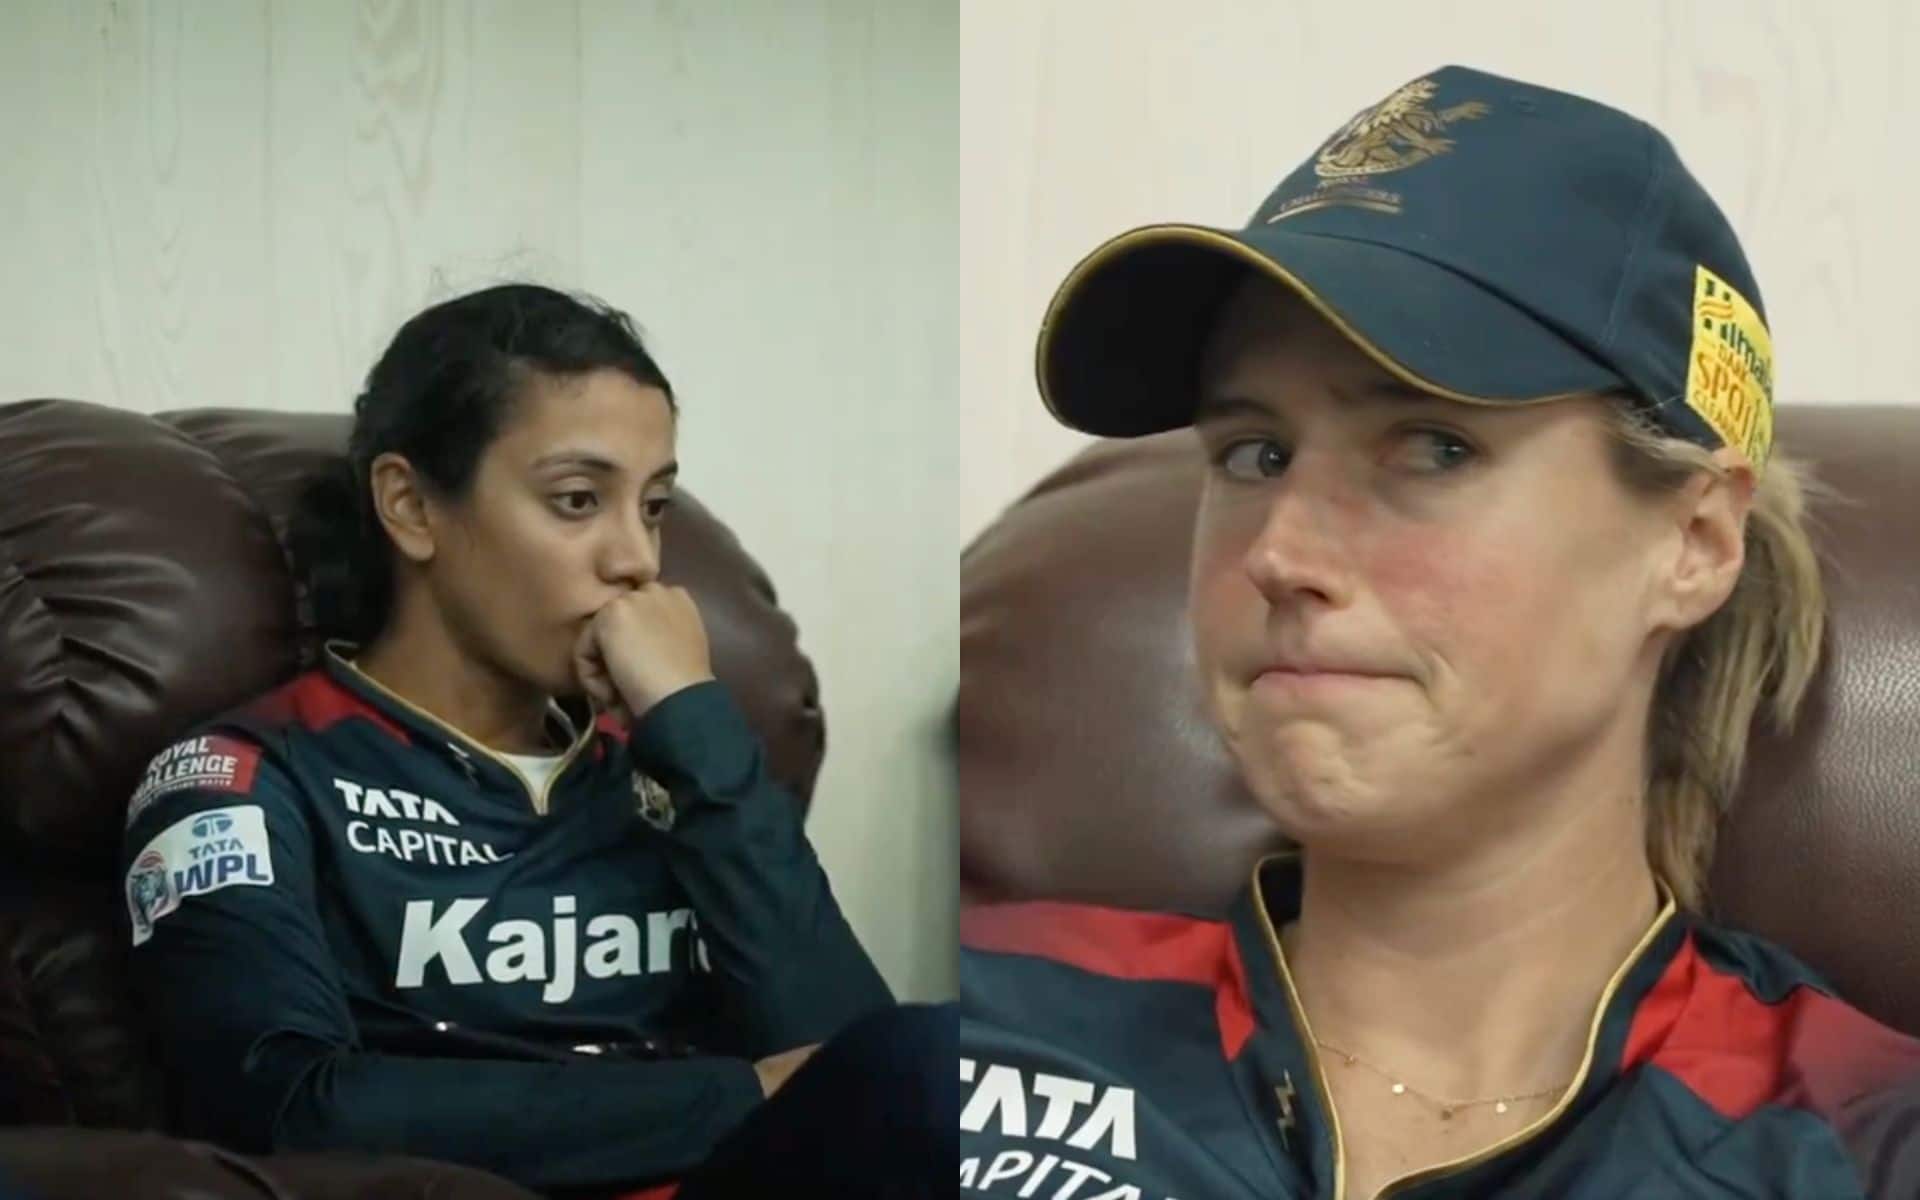 Smriti Mandhana and Ellyse Perry 'teary-eyed' in the dressing room (X.com)